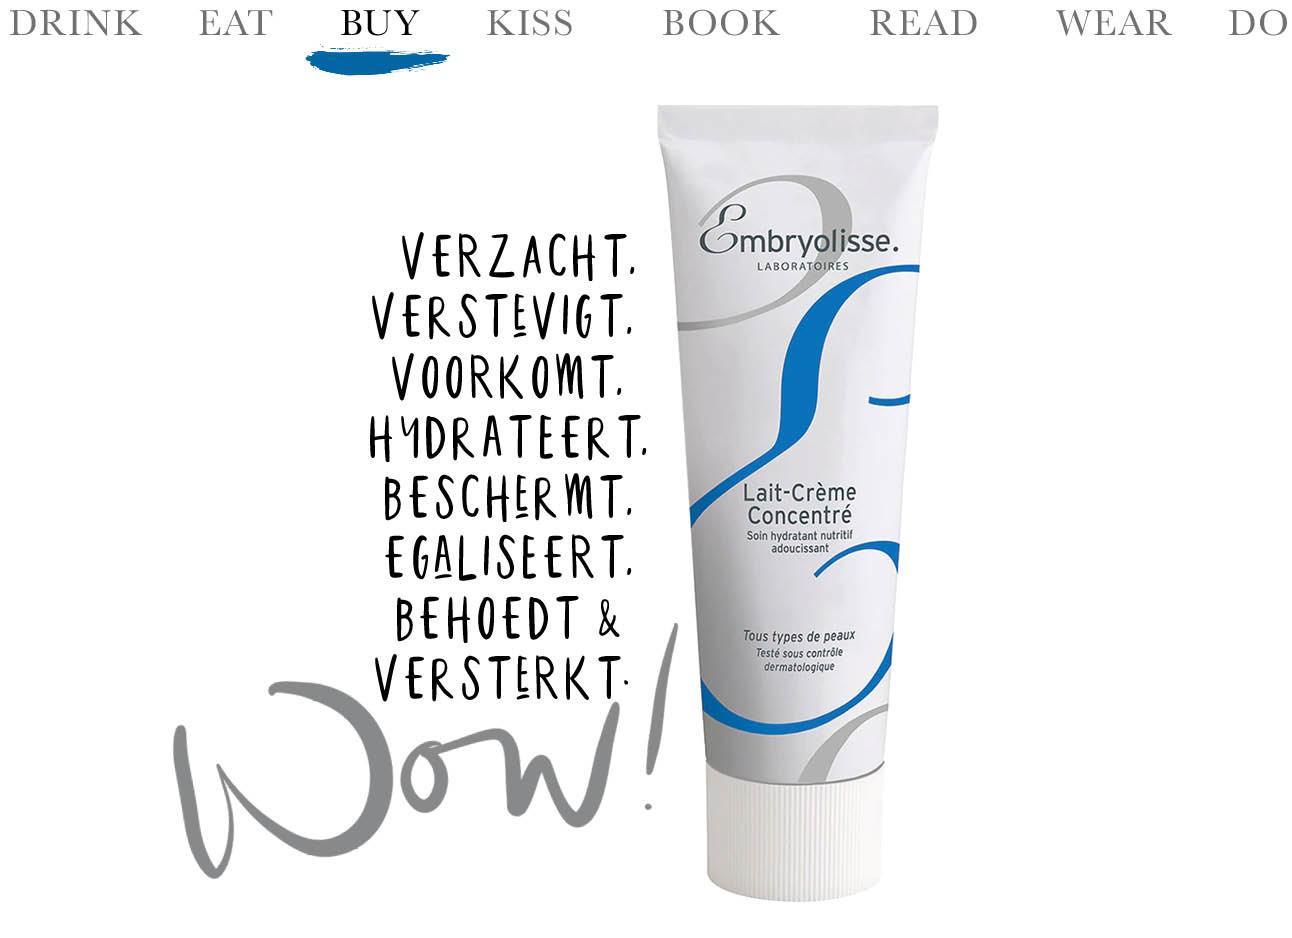 today we use embryolisse, huidcreme, witte tube met blauwe details, wow